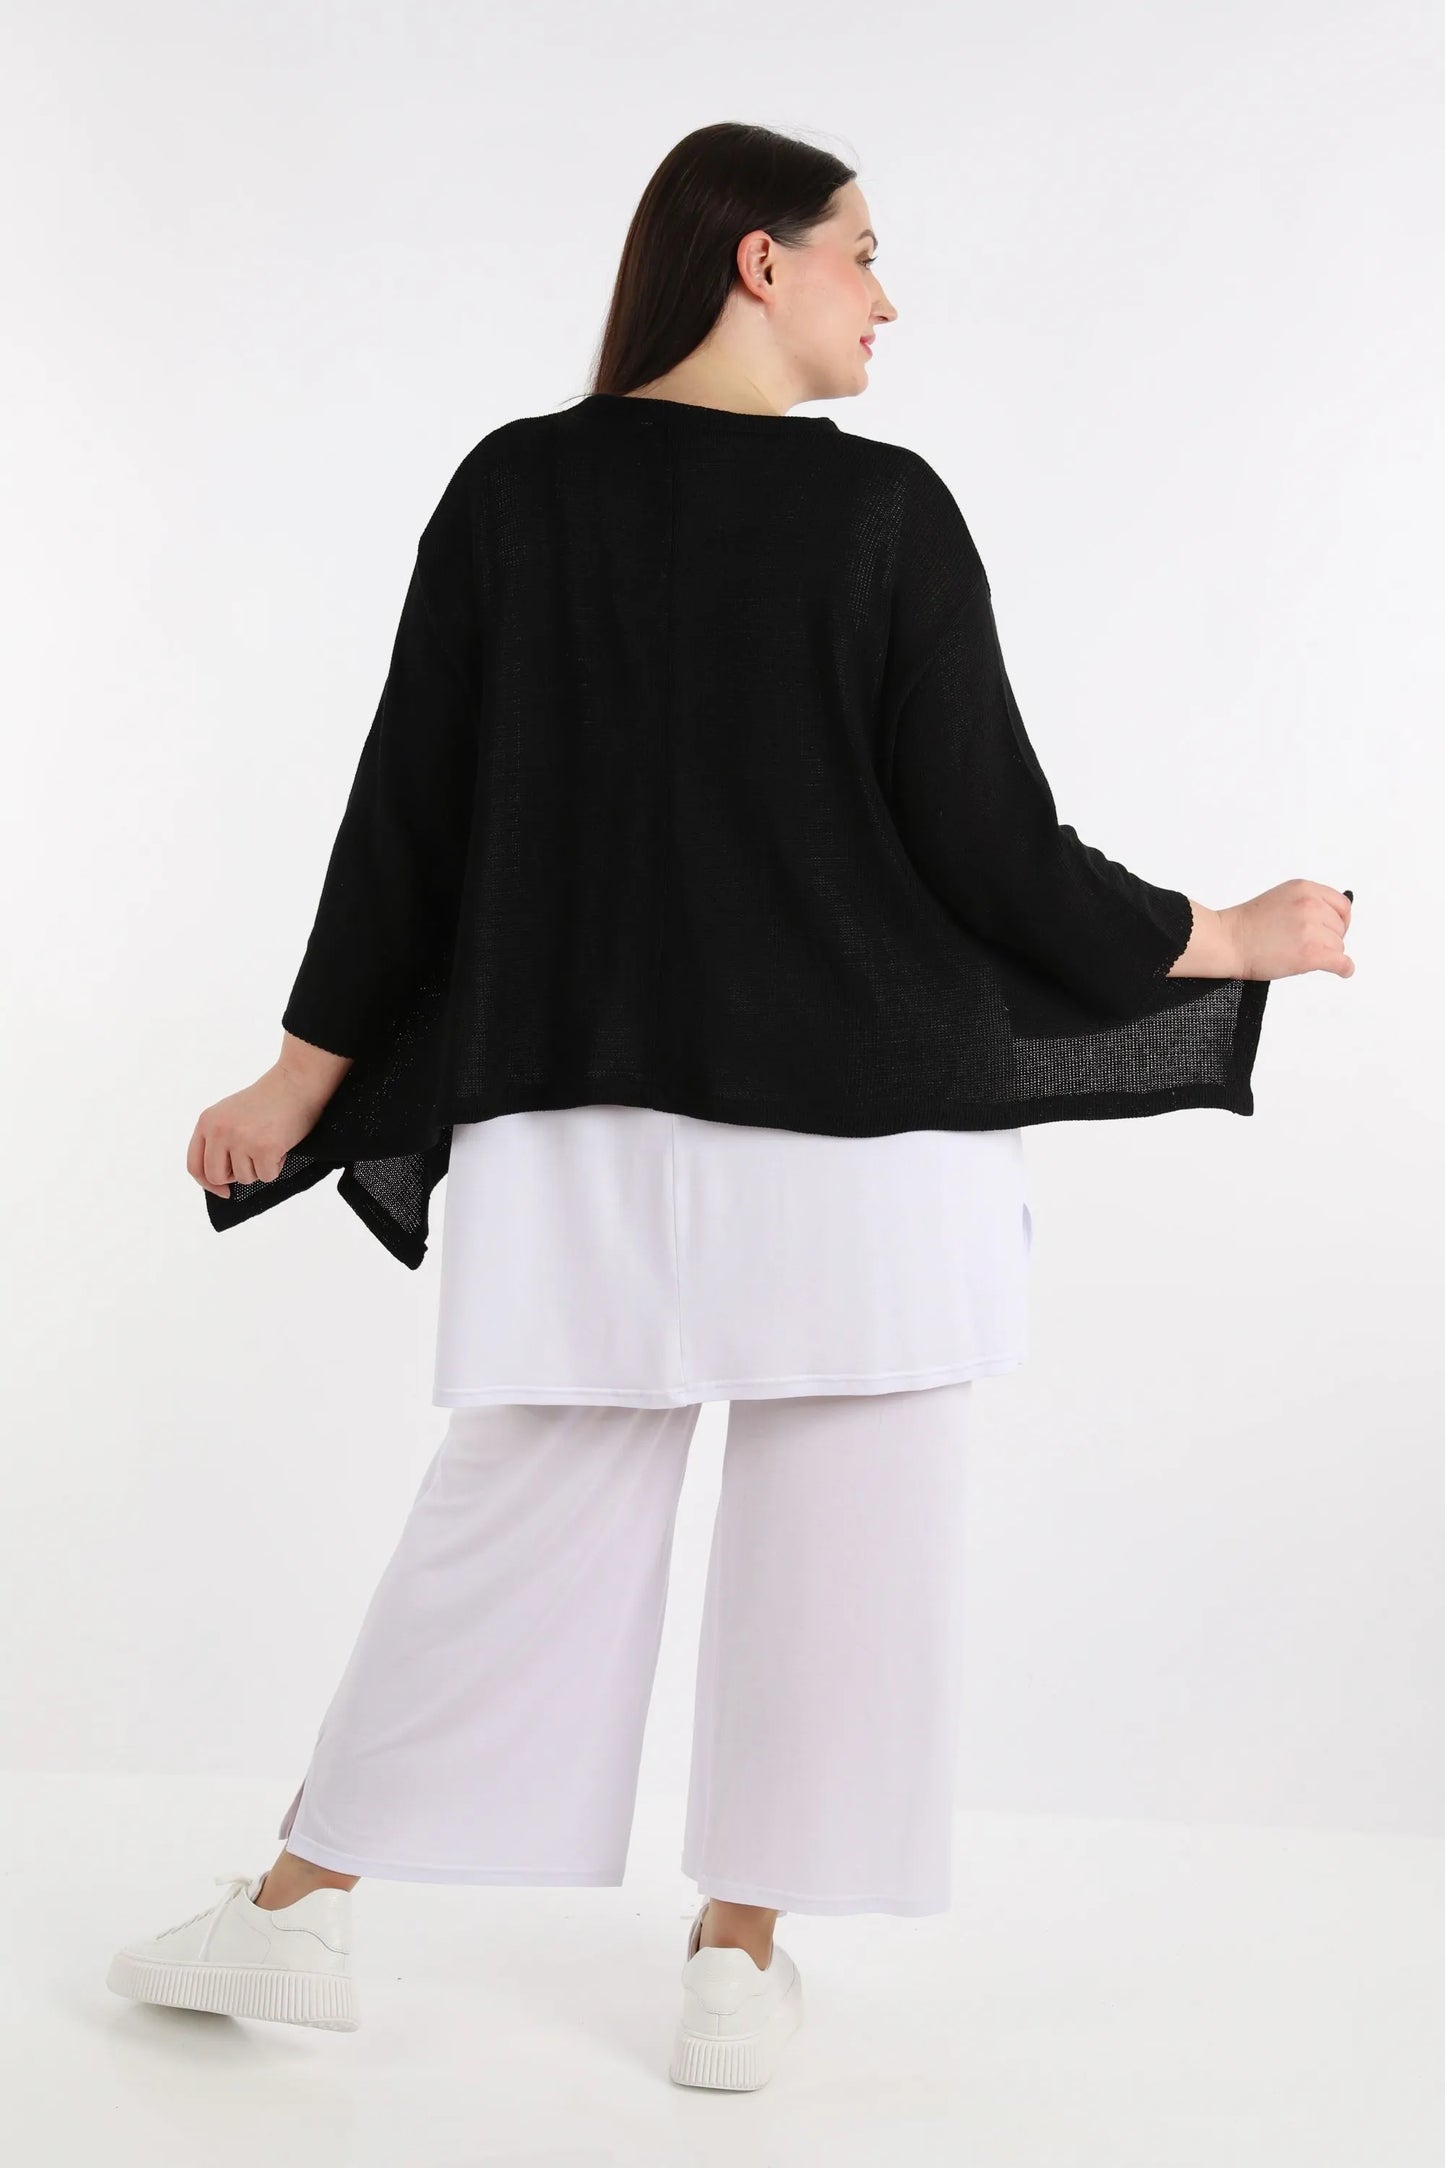 Summer jacket in A-shape made of light knit quality, knit in black